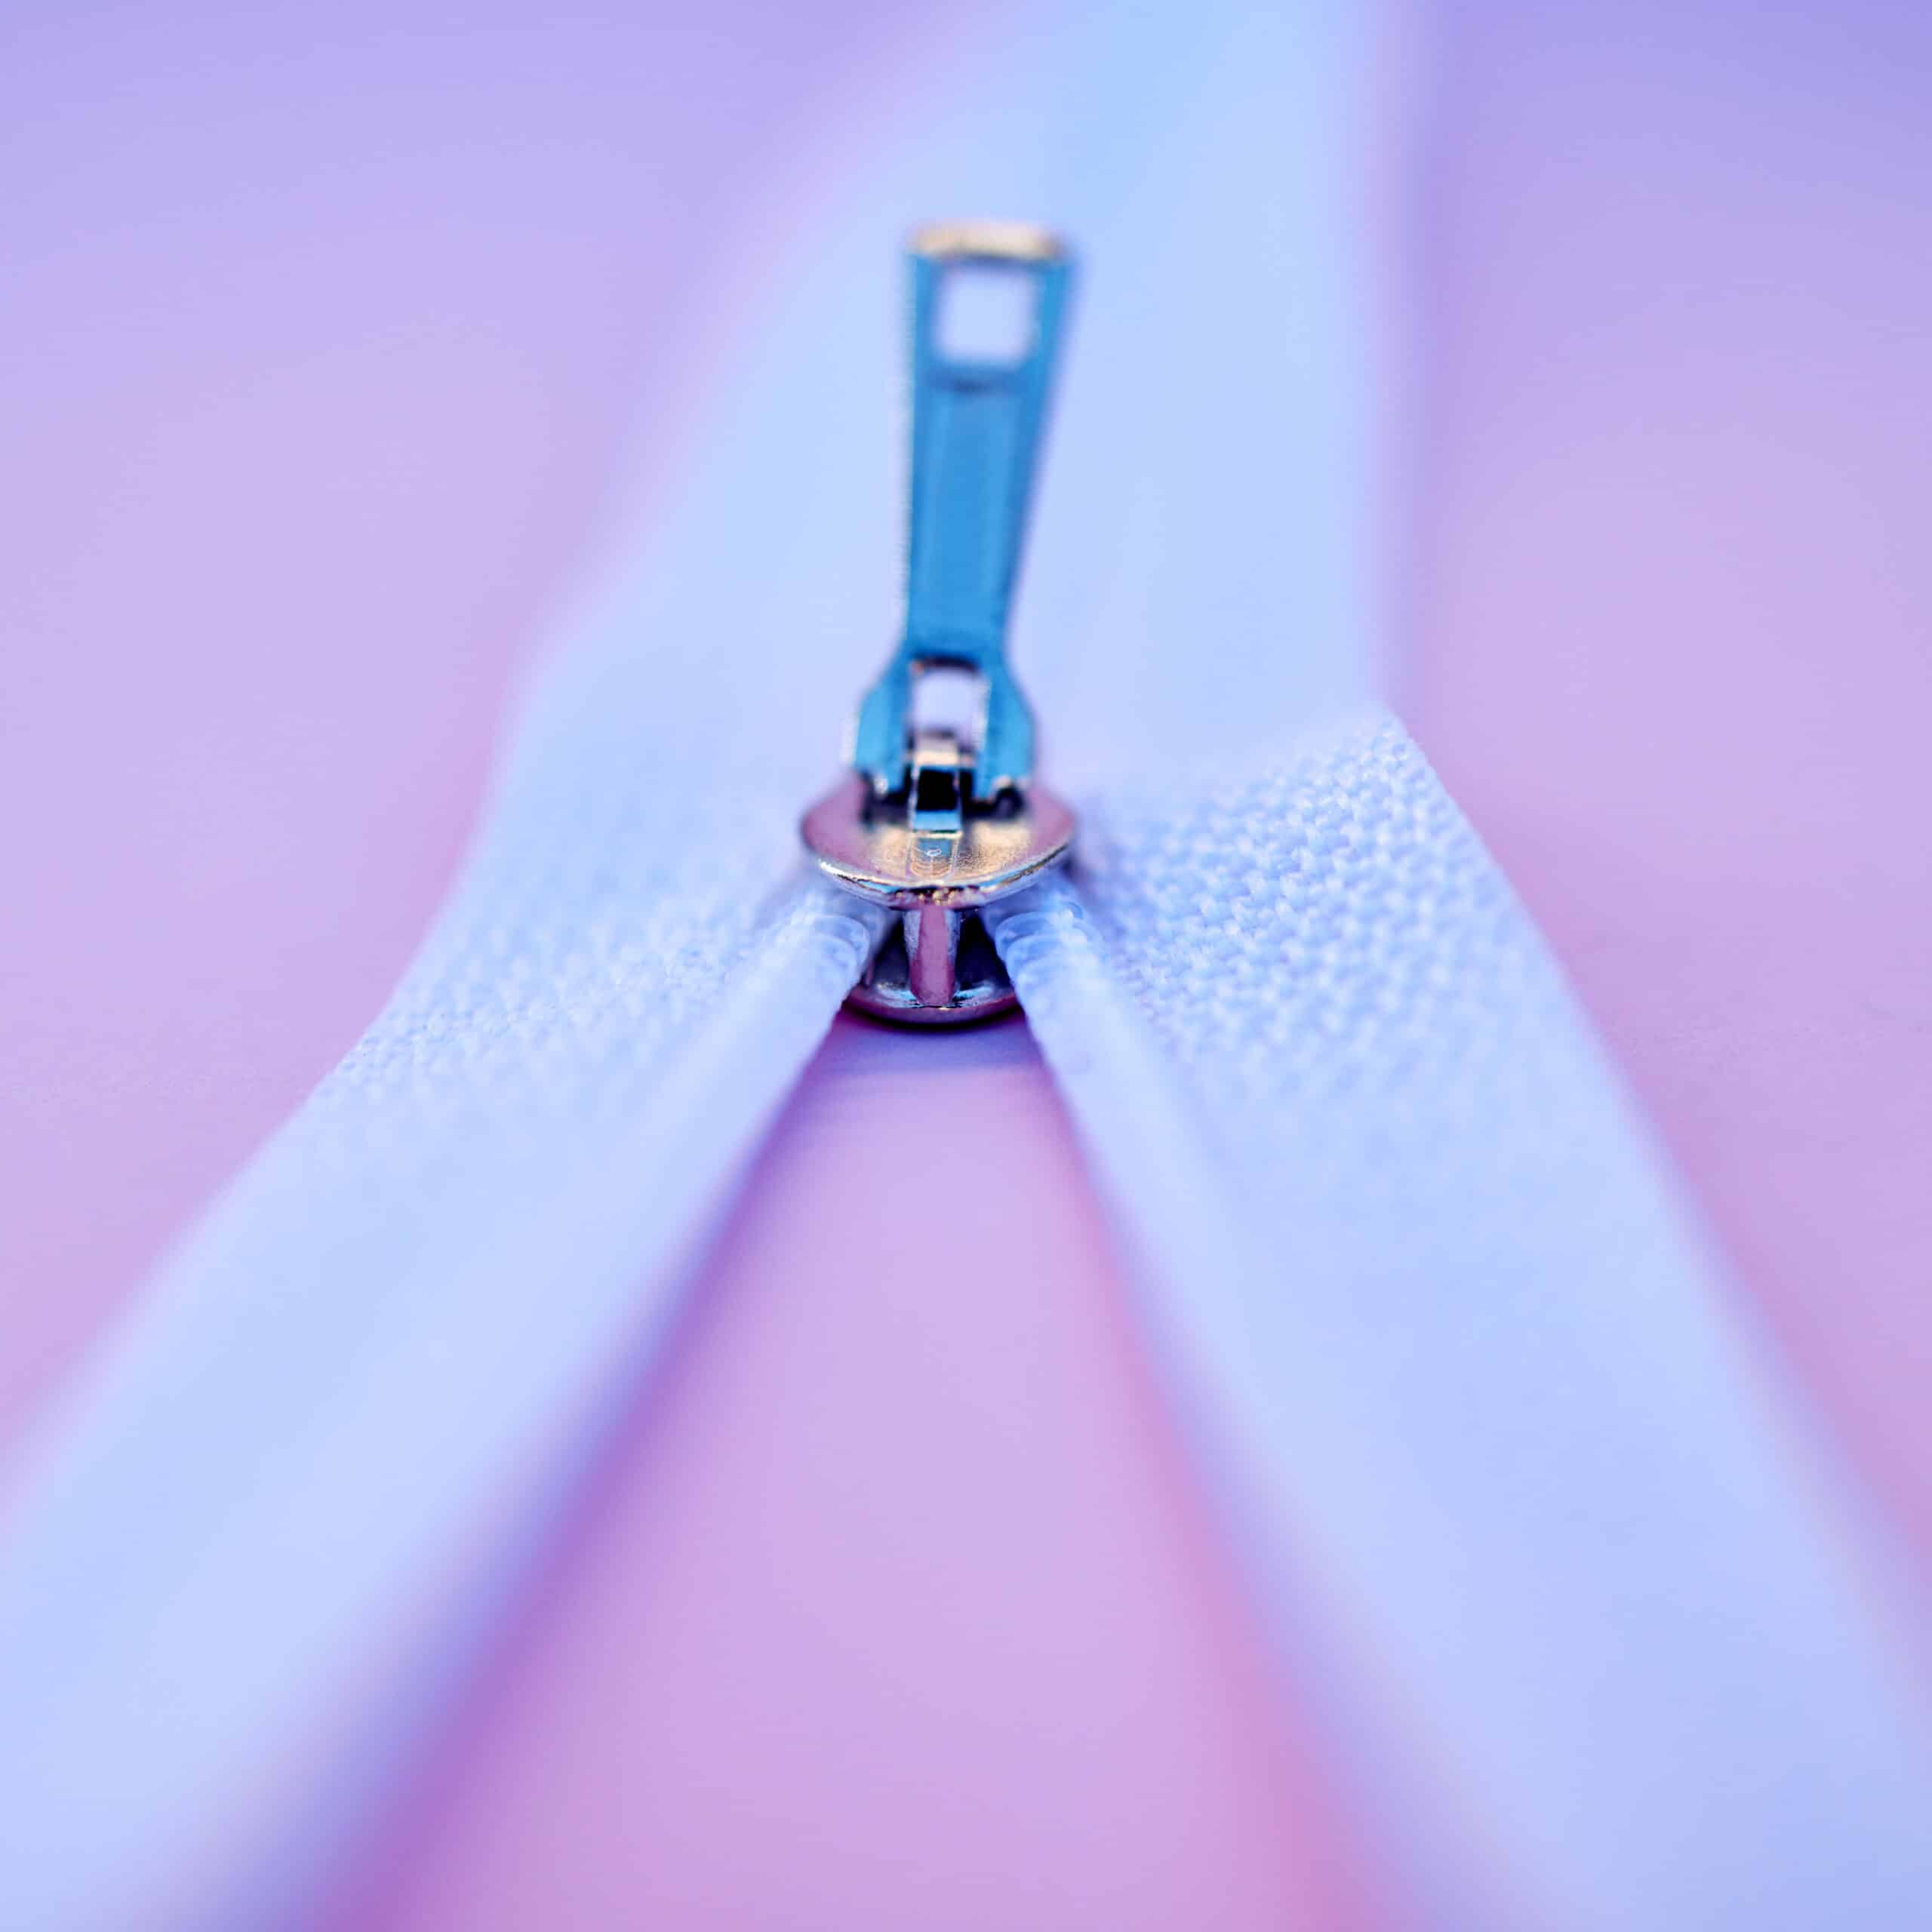 Closeup of a metal zip isolated on a pink background. Macro view of a zipper closing or being unzip